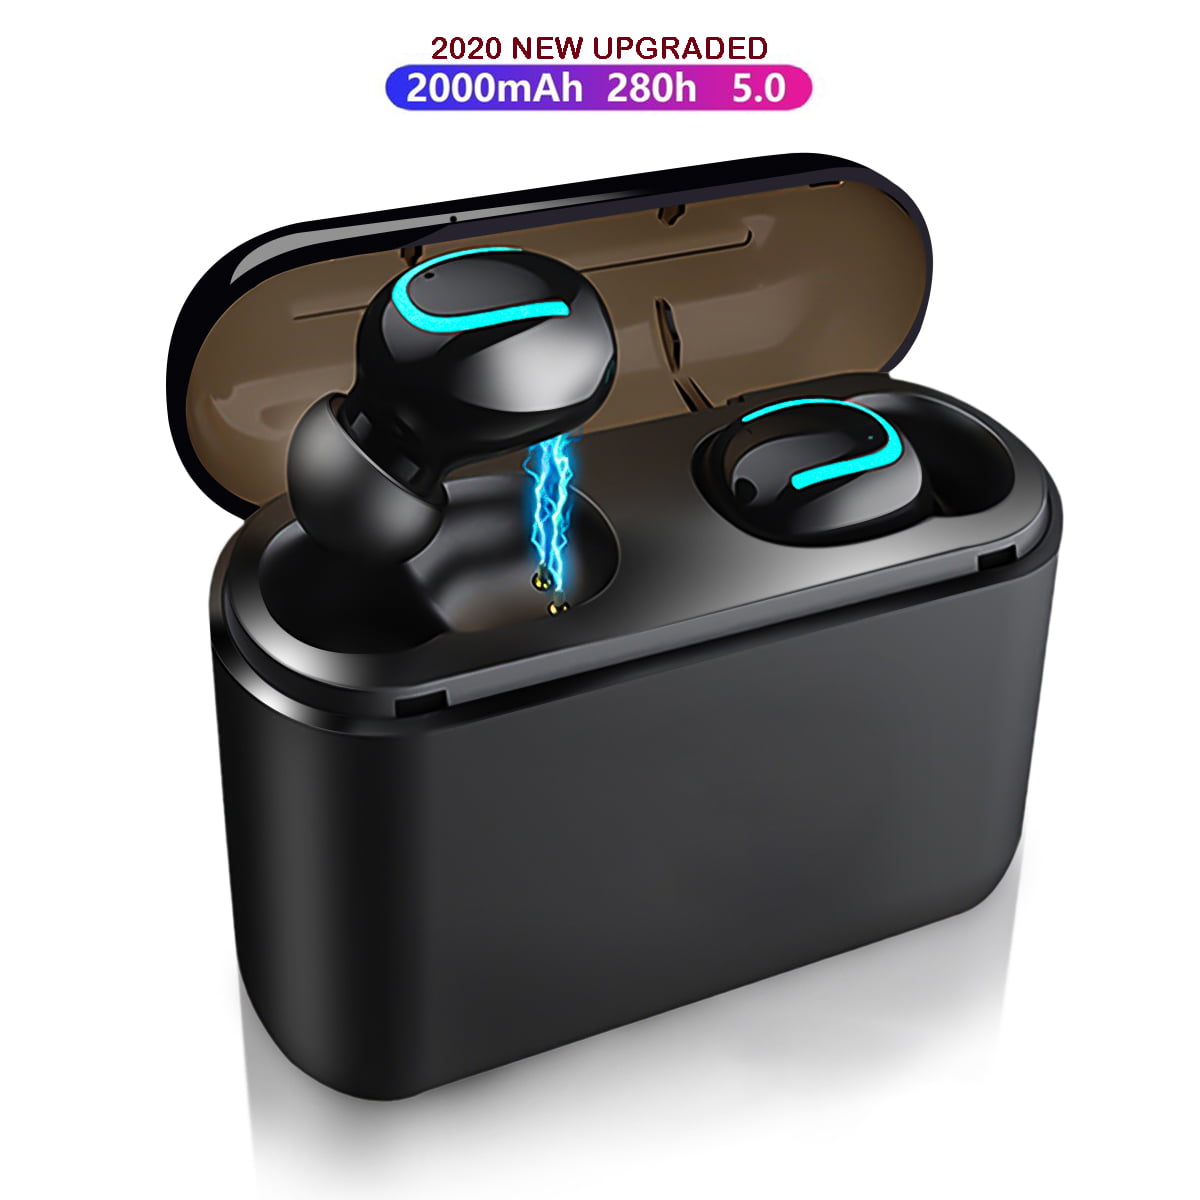 Wireless Bluetooth Earbuds, Hands-free Calling Sweatproof In-Ear Headset Earphone with Charging Case for iPhone/Samsung & Smart Phones, I0056